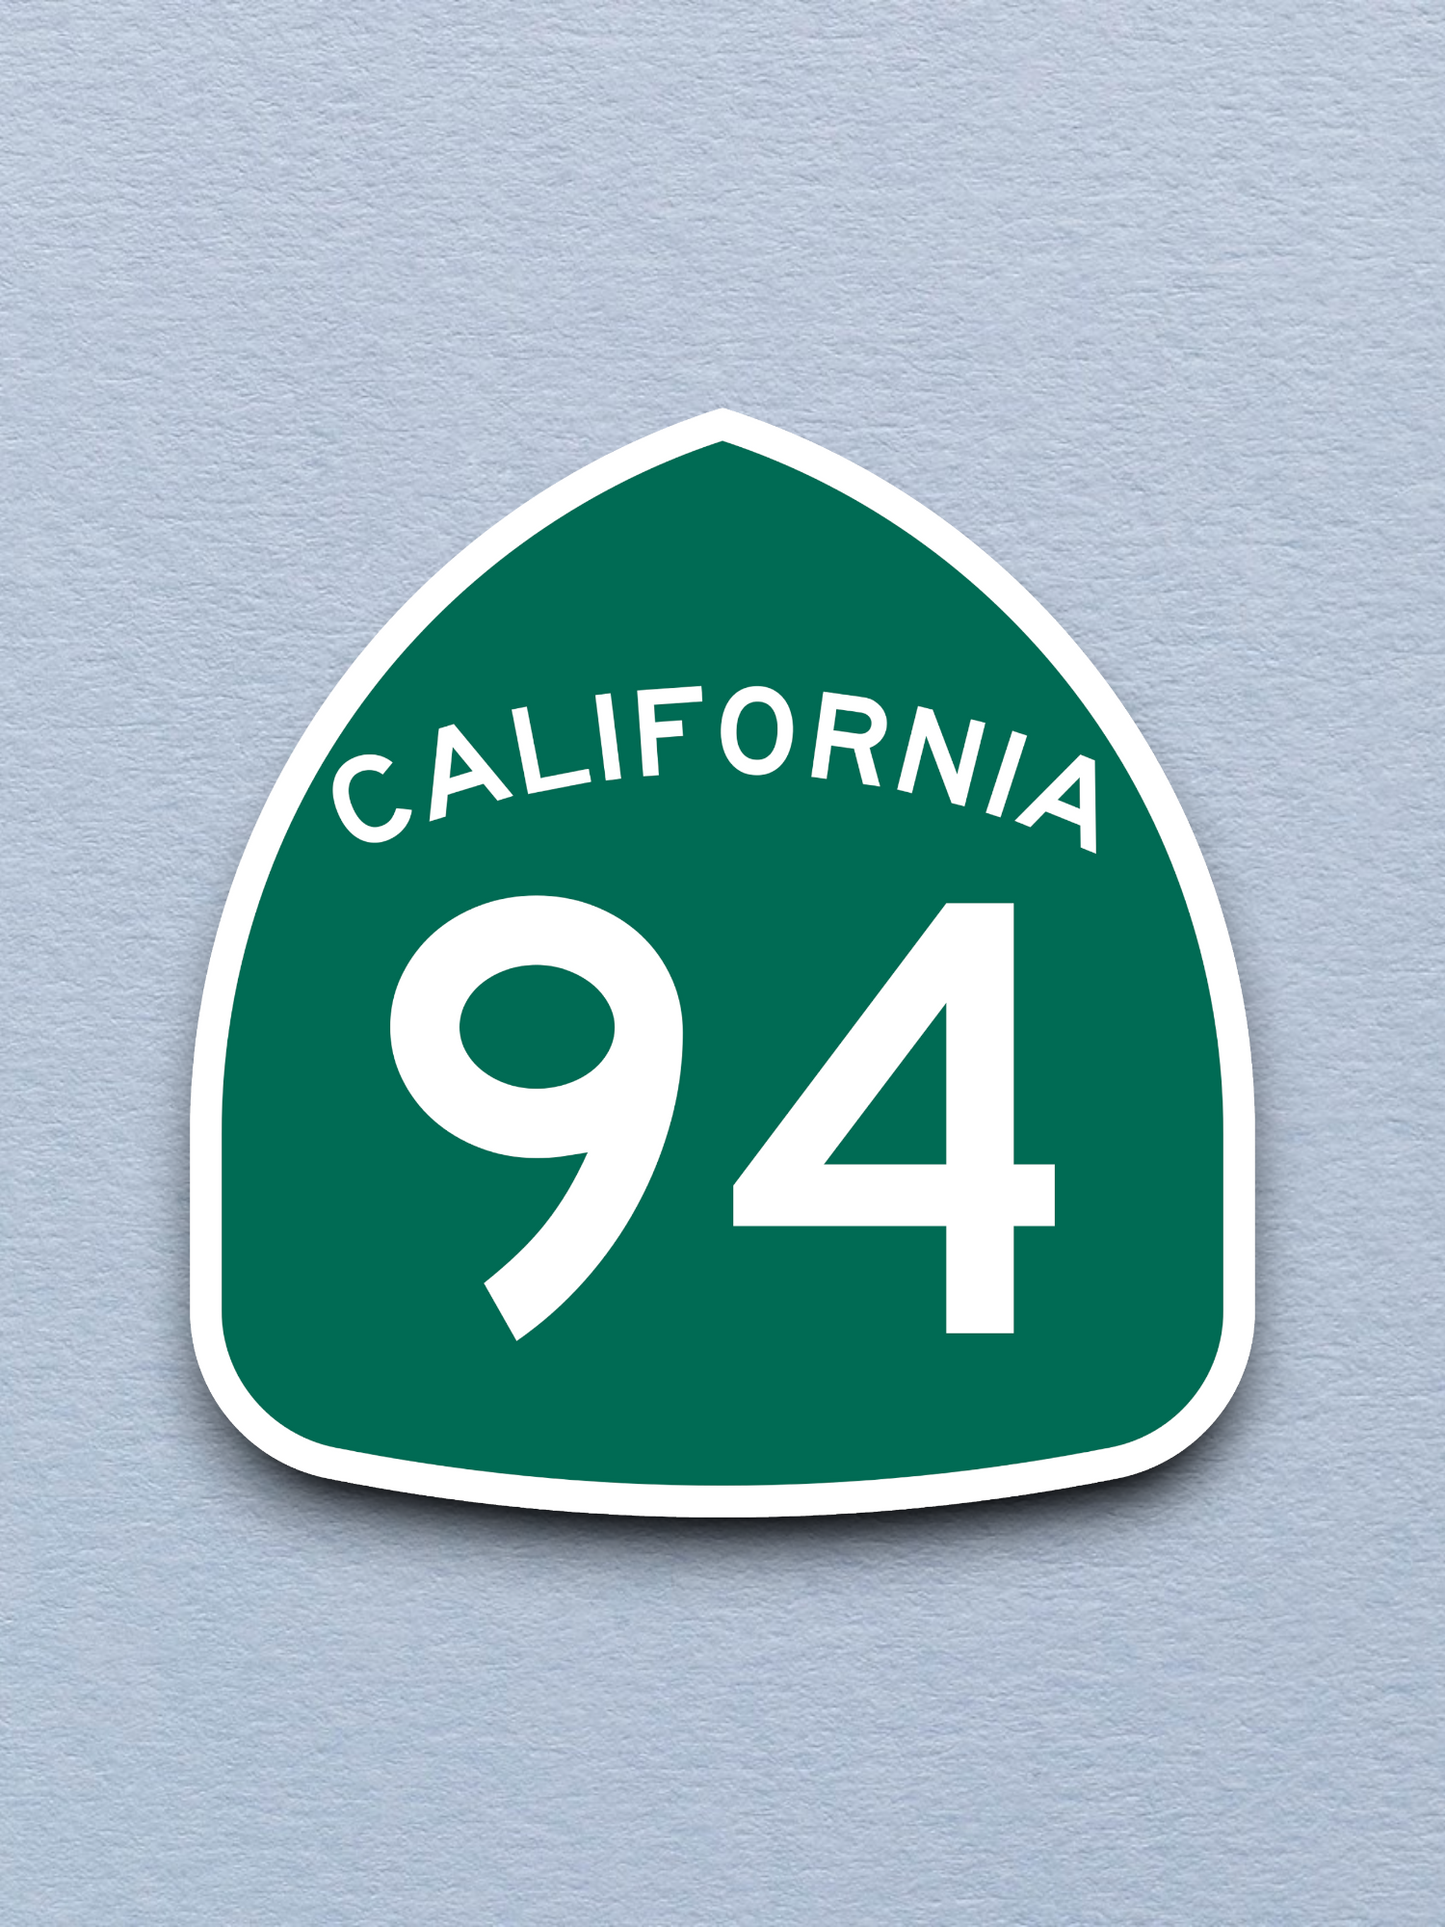 California State Route 94 Road Sign Sticker